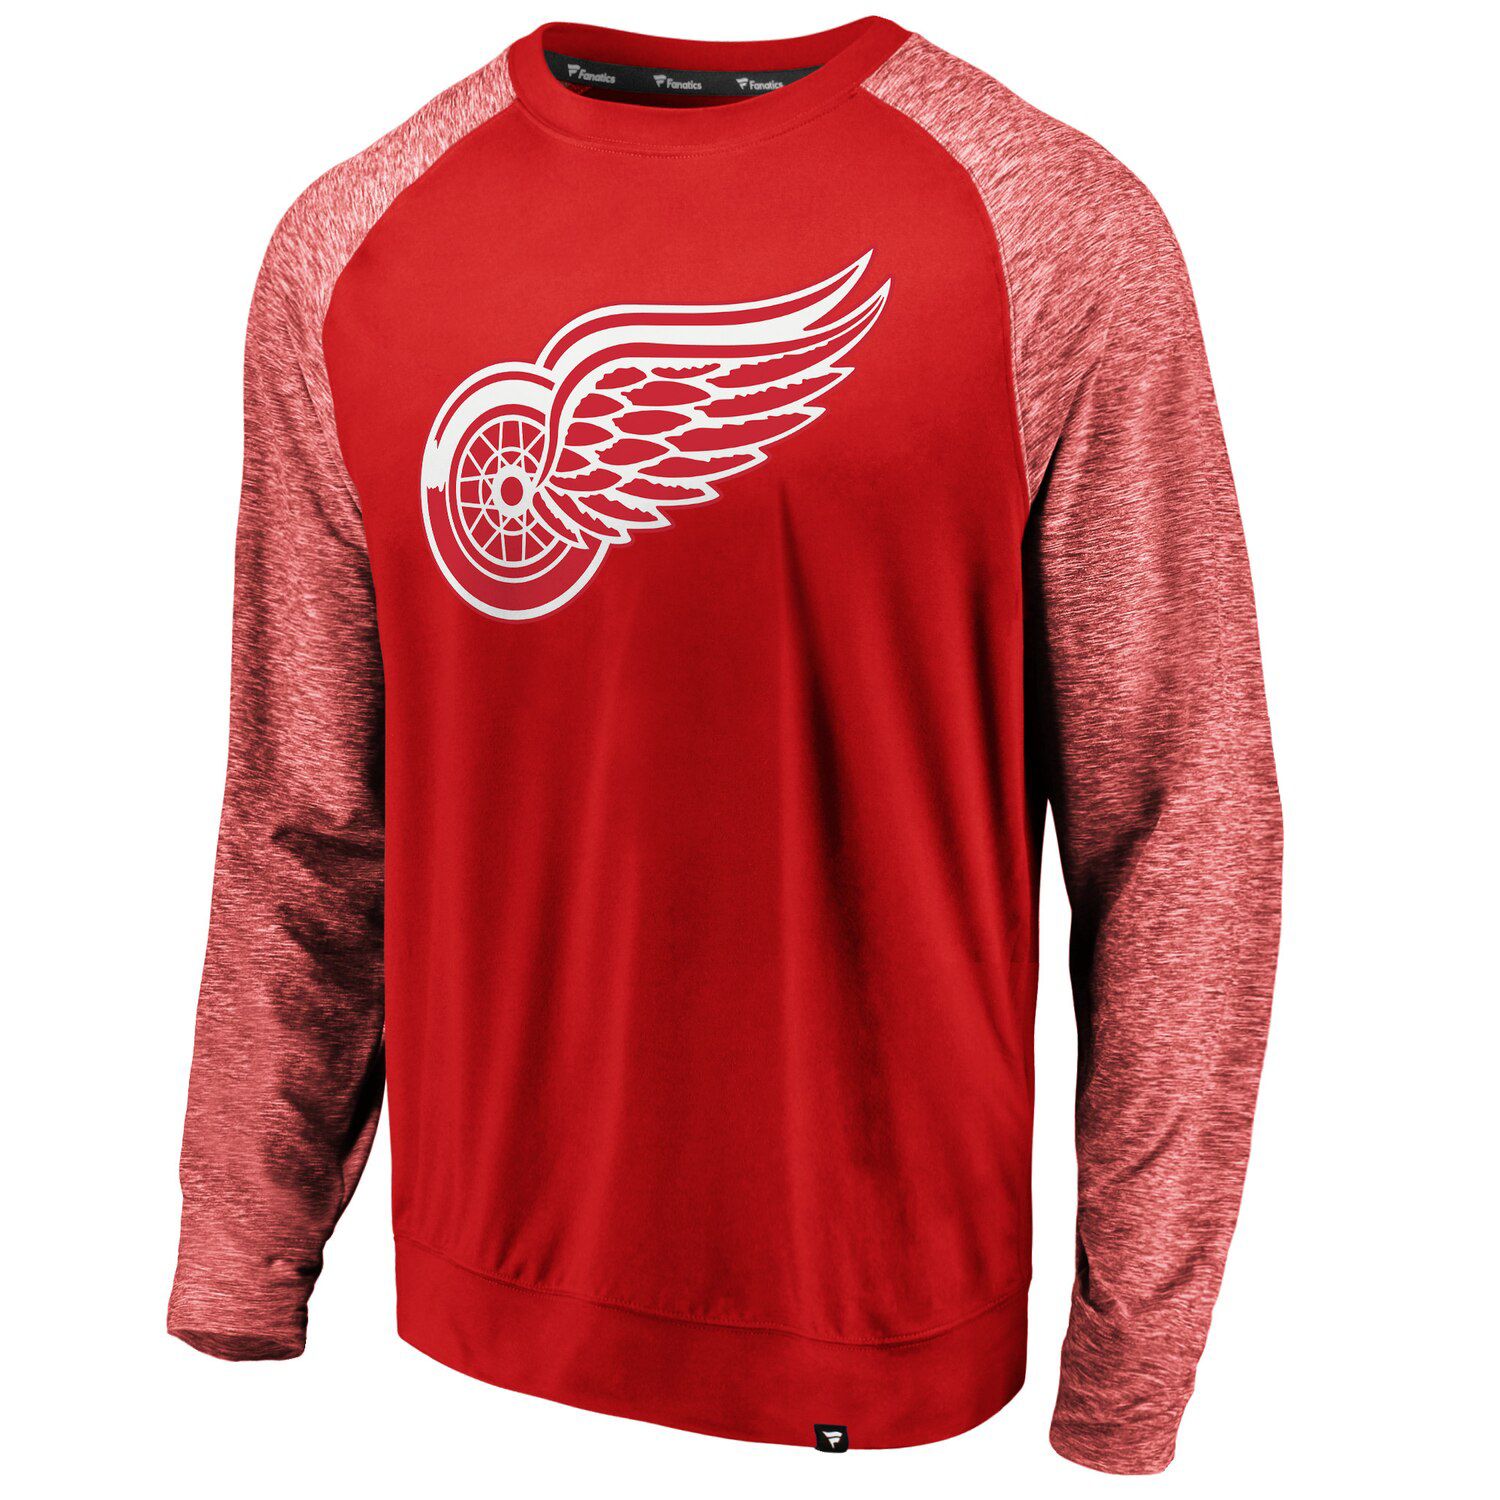 red wings long sleeve t shirt